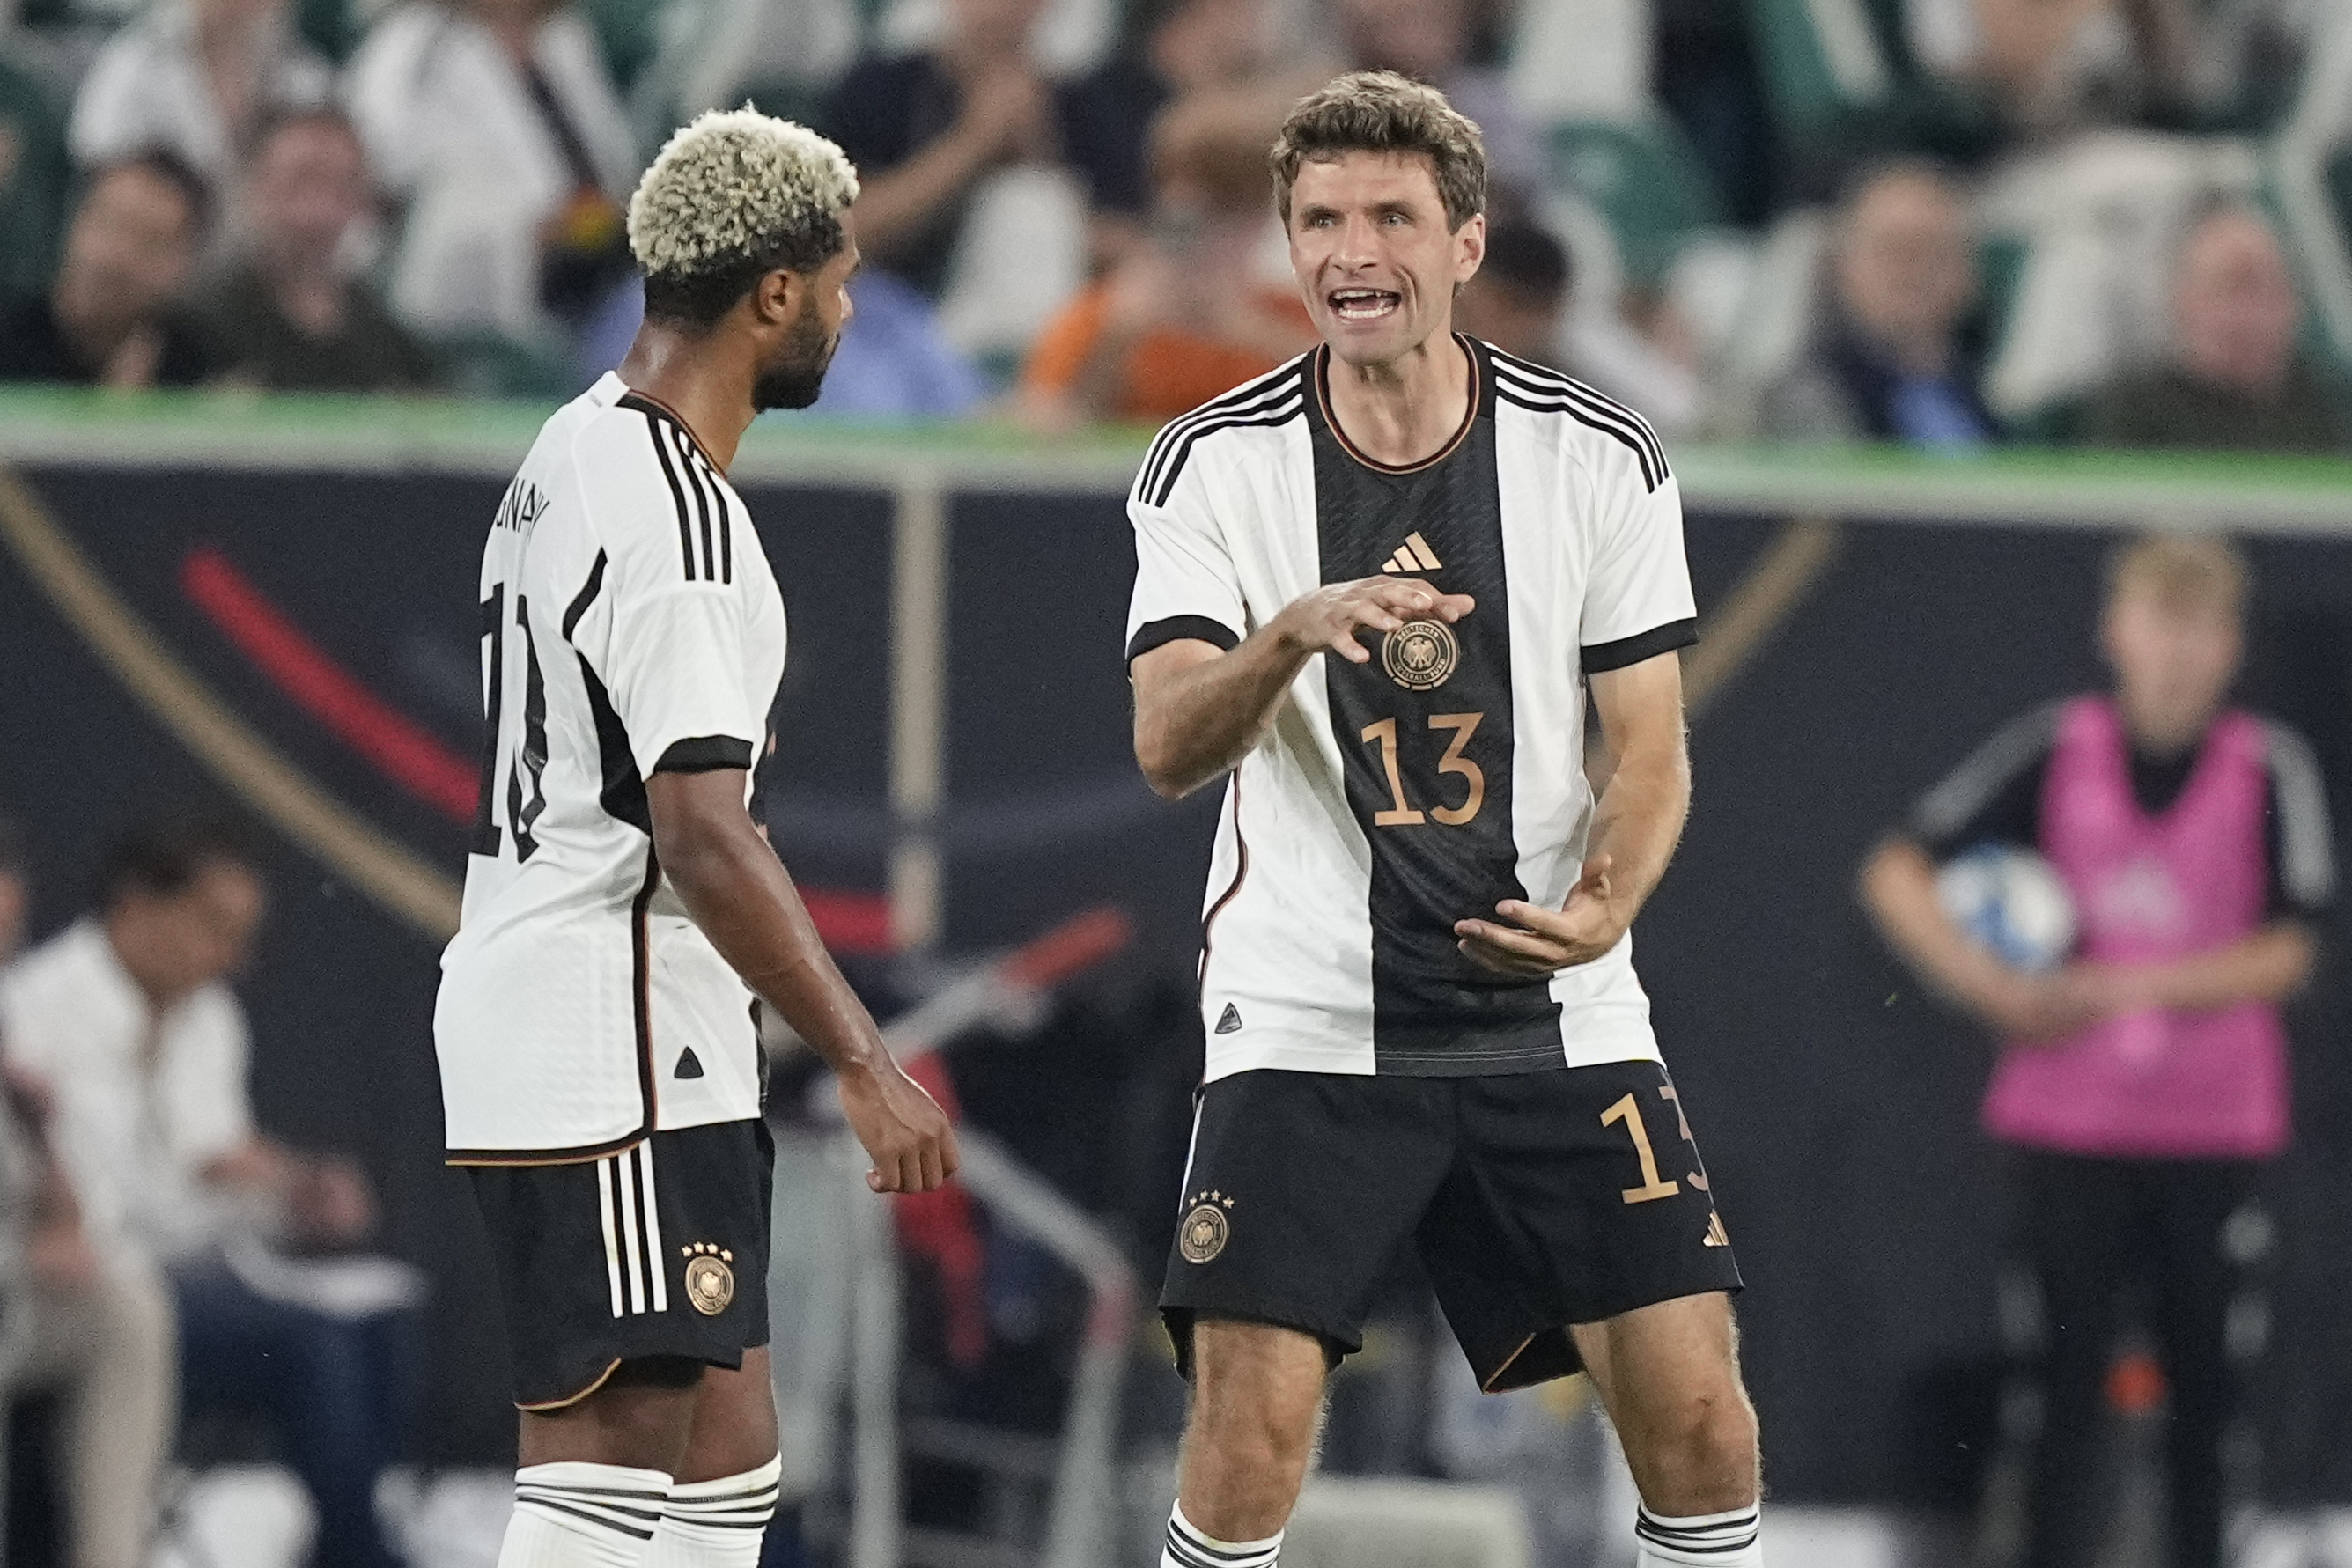 Germany's Thomas Muller, right, gestures during an international friendly soccer match between Germany and Japan in Wolfsburg, Germany, Saturday, Sept. 9, 2023. (AP Photo/Martin Meissner)